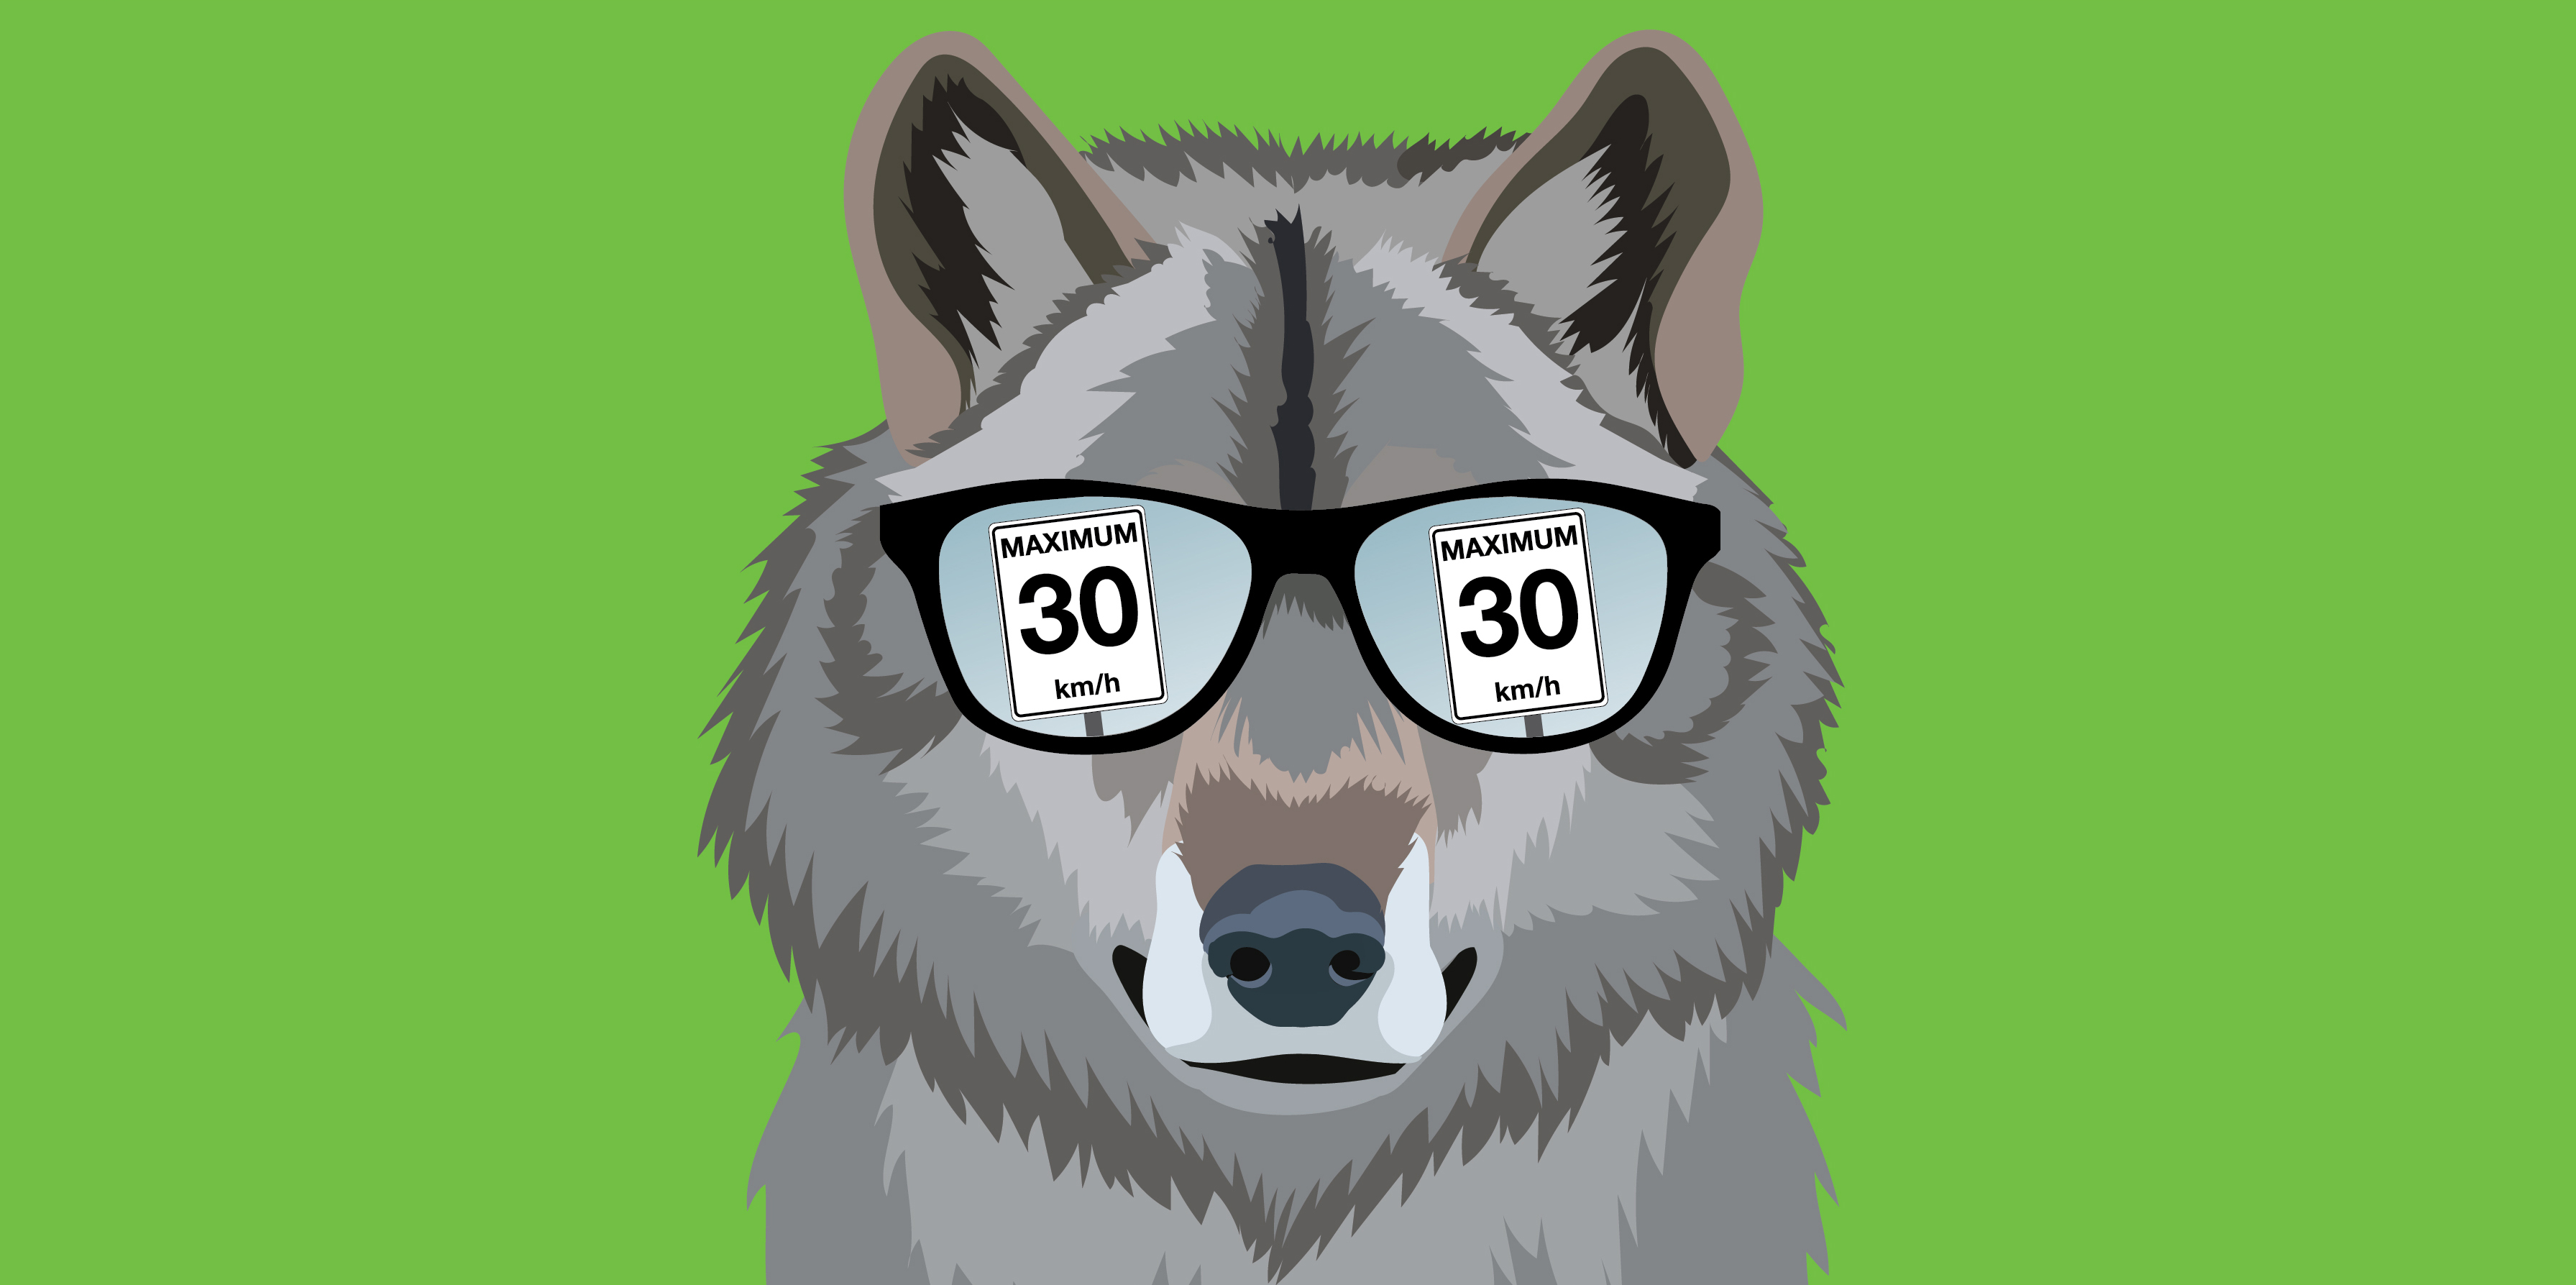 Drawing of a wolf wearing sunglasses on a green background. A 30km per hour speed limit sign is in the reflection of the sunglasses.